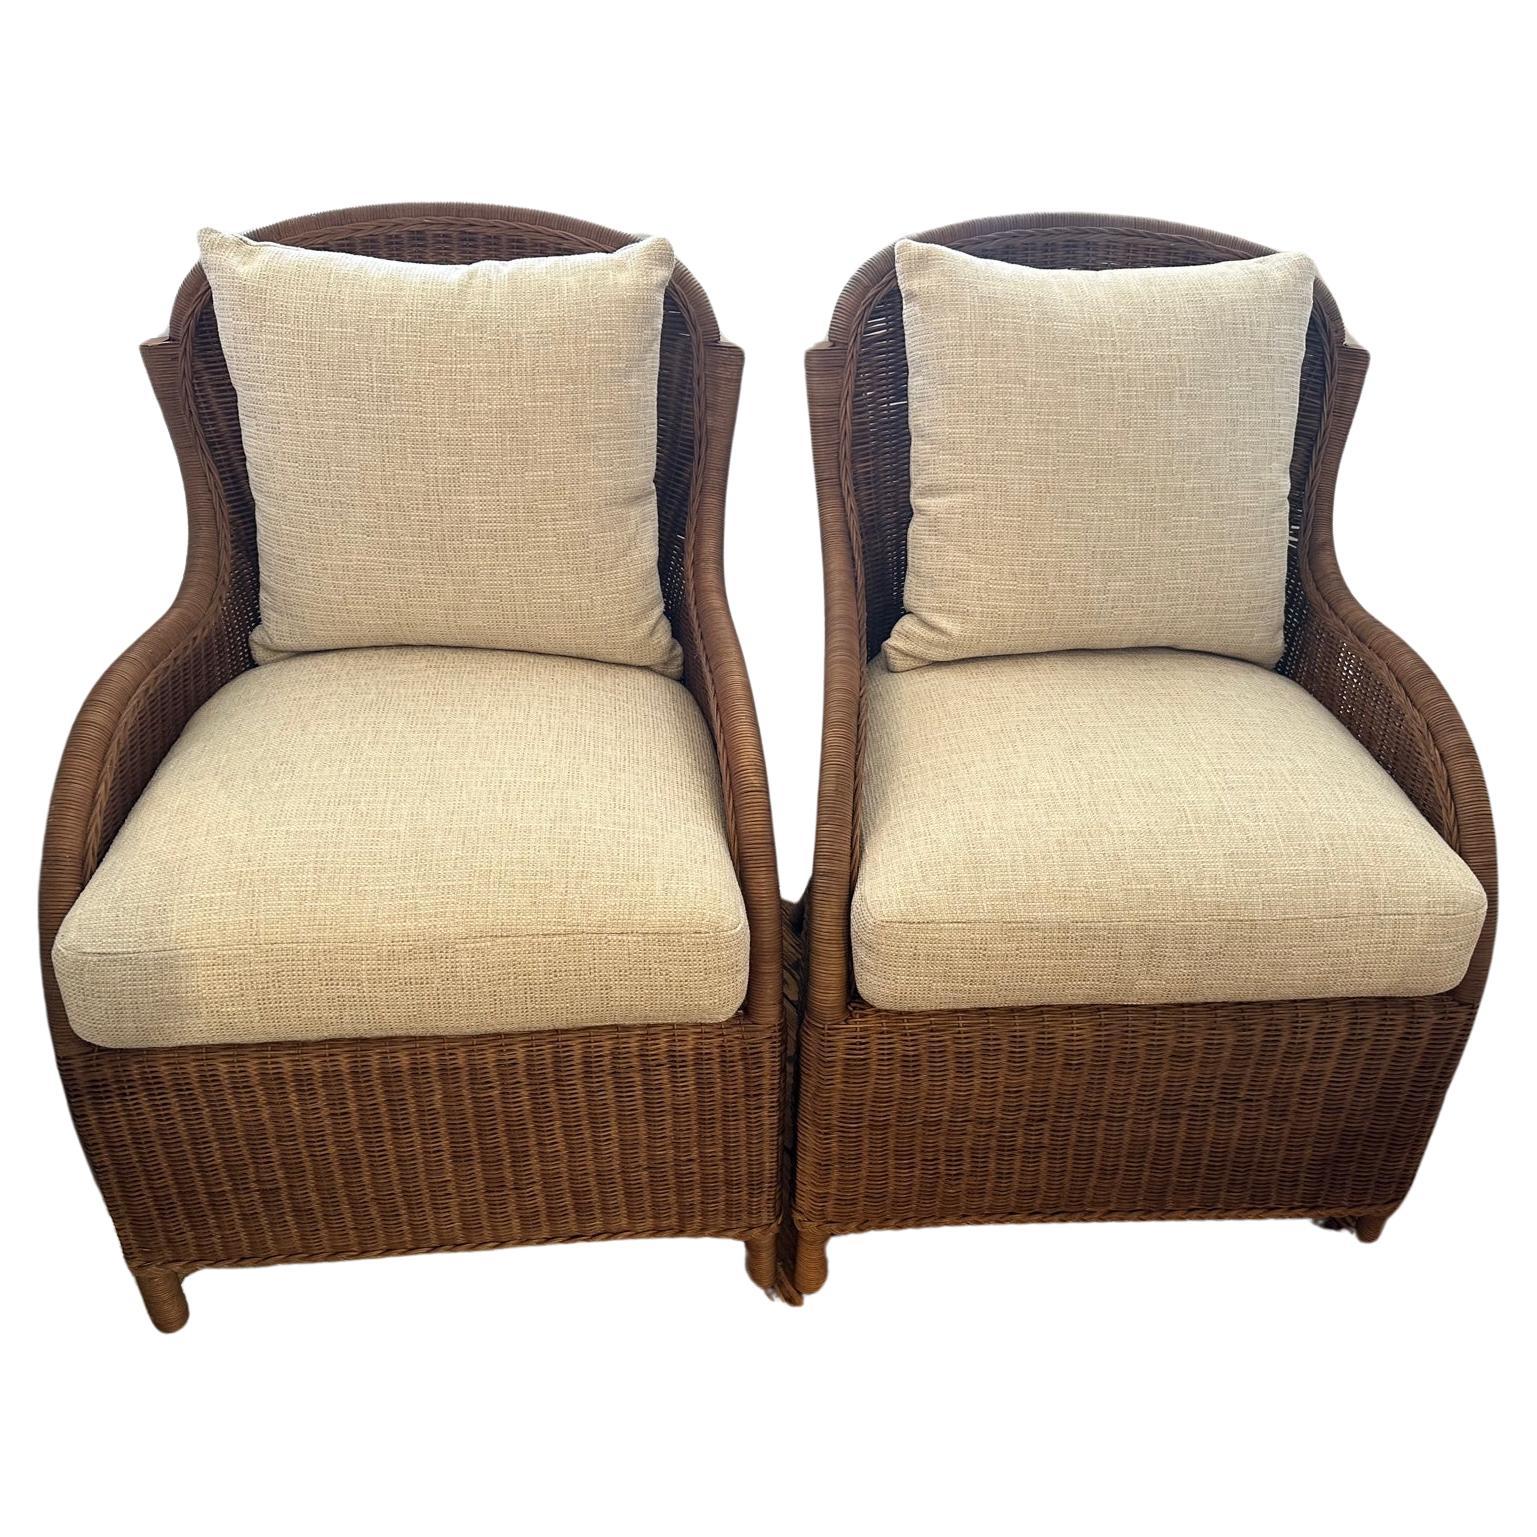 Pair of E J Victor Brown Wicker and Neutral Upholstered Seat & Back Cushions For Sale